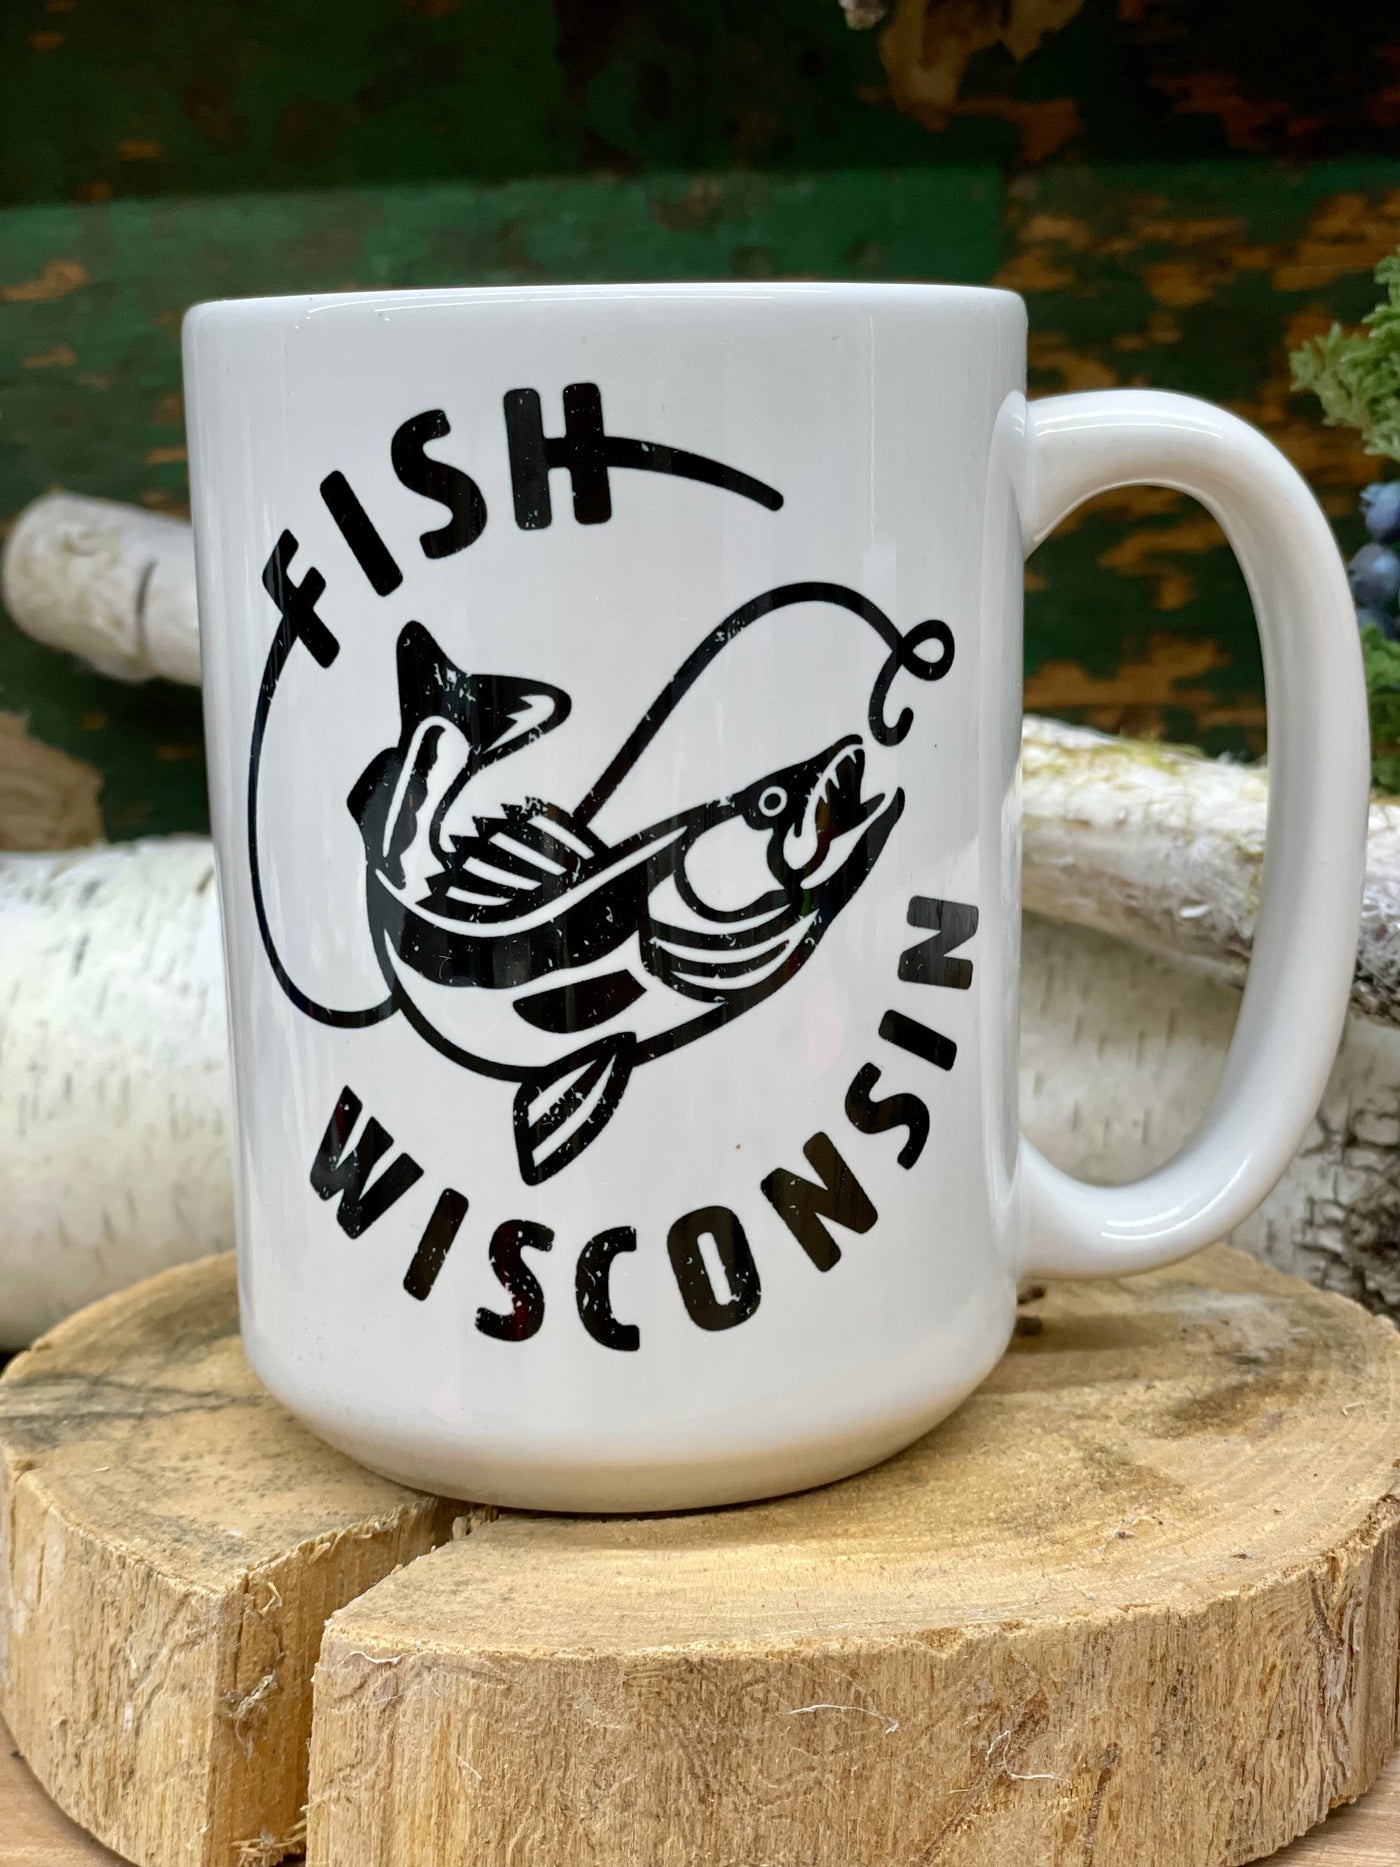 Fish Wisconsin Mug - Local Delivery